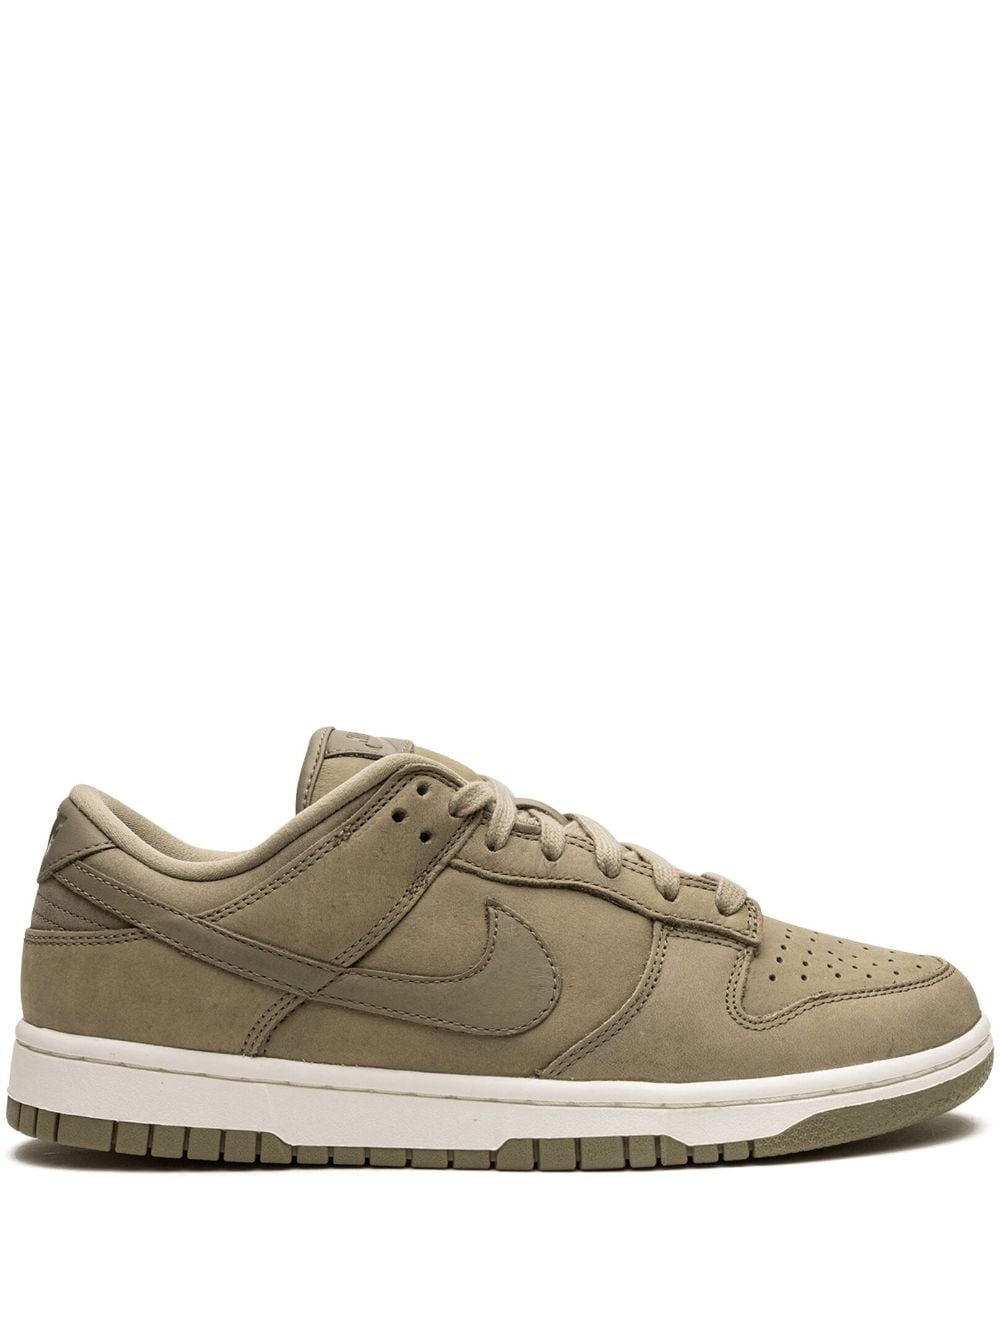 Image 1 of Nike Dunk Low PRM MF "Neutral Olive" sneakers